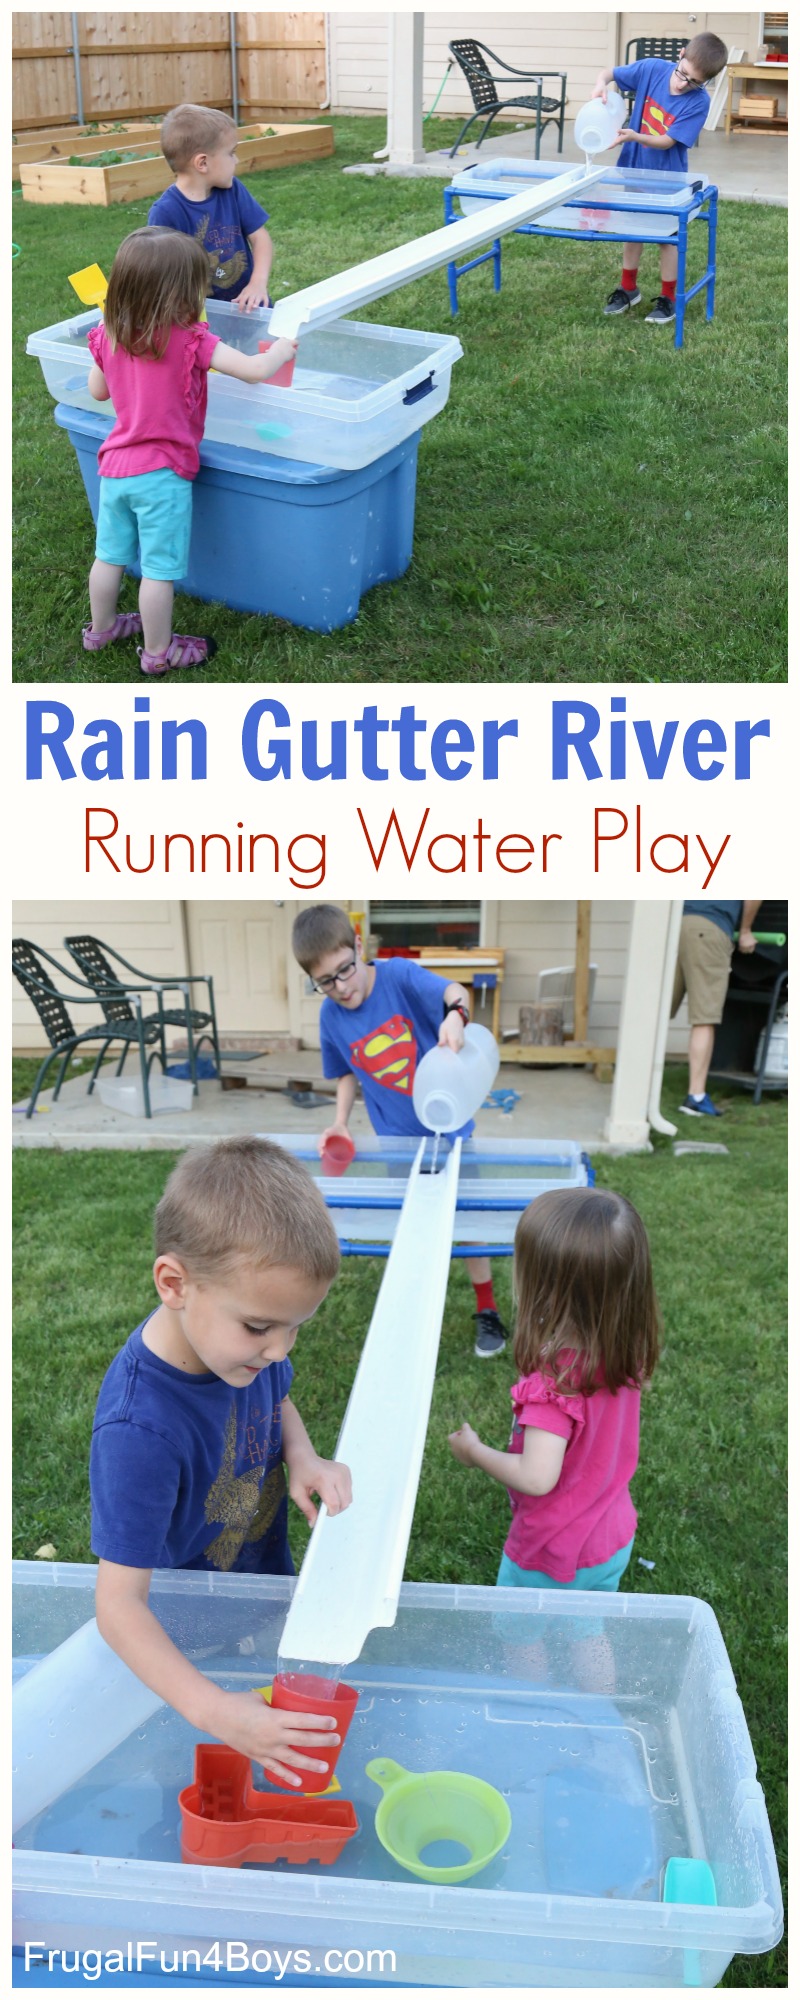 Build a Rain Gutter River - Water Play Activity for Kids